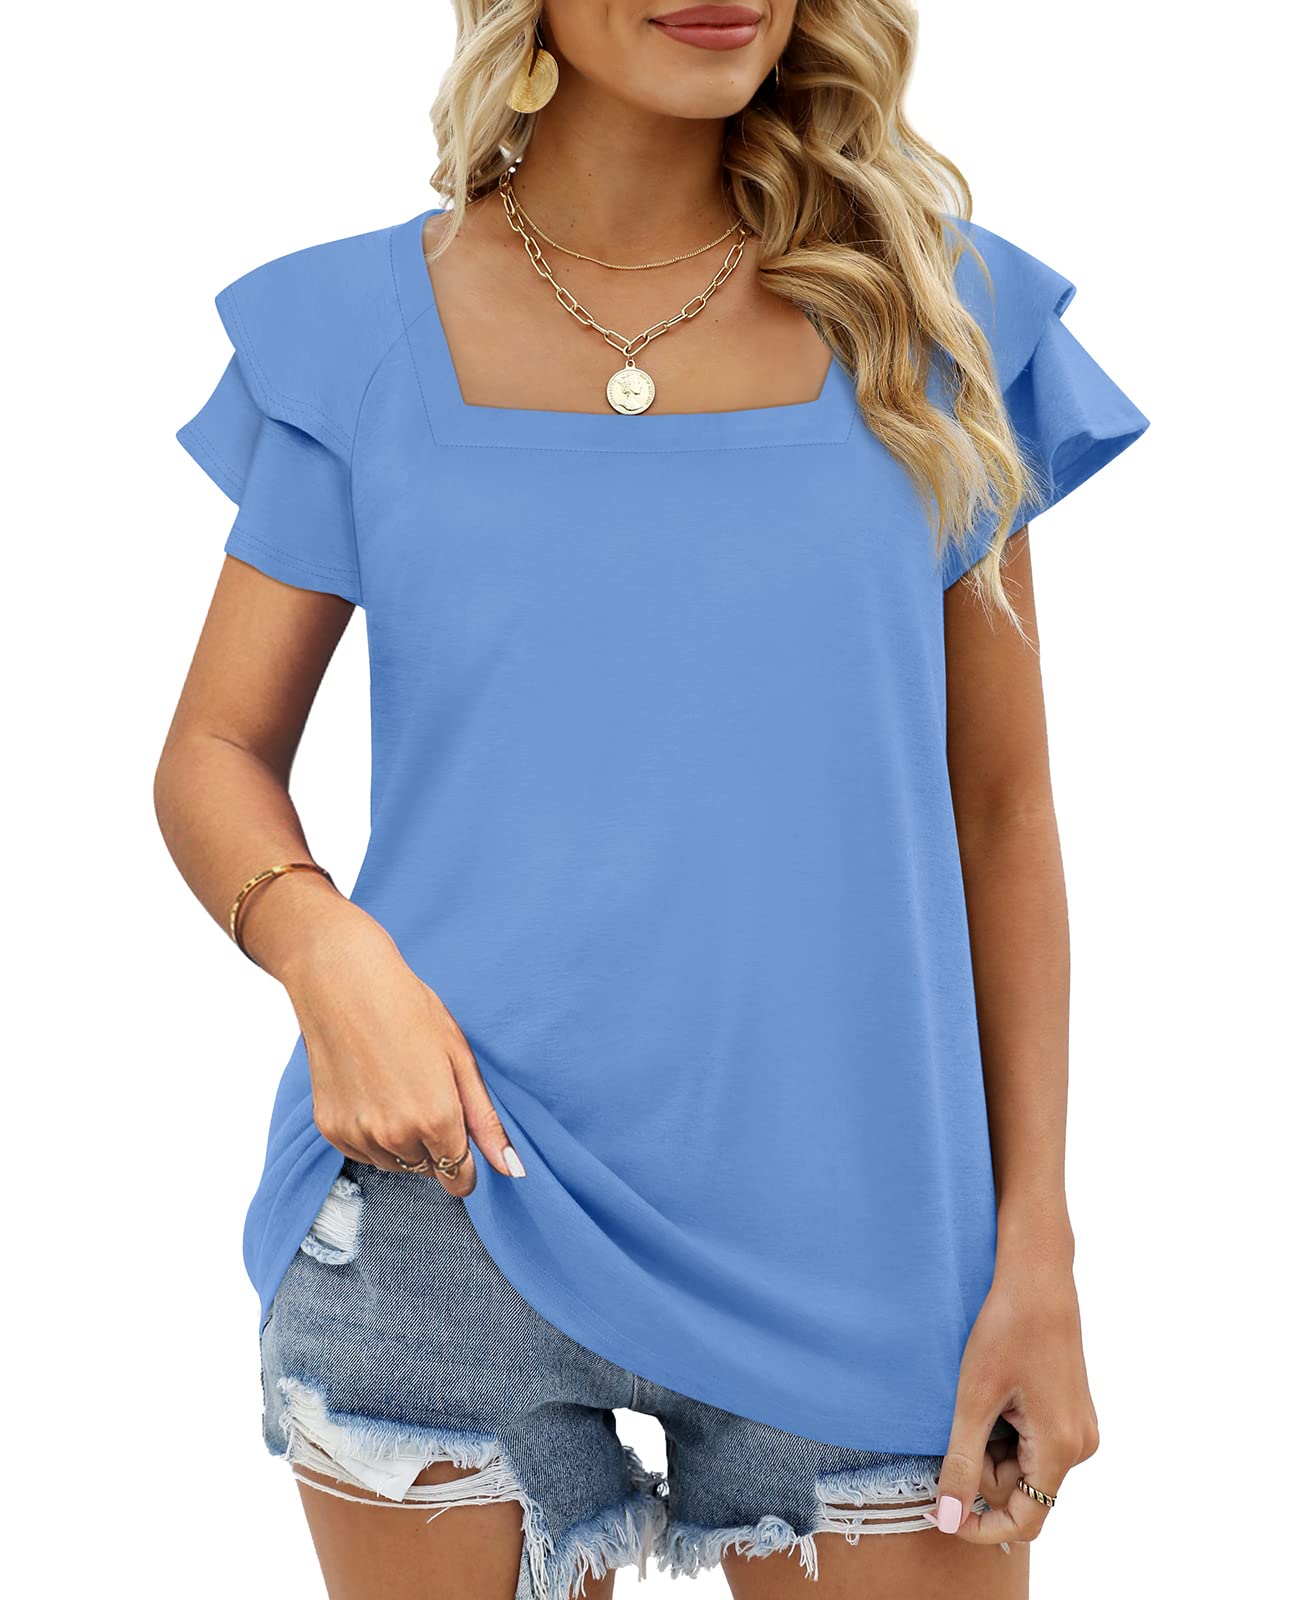 OFEEFAN Womens Tops Ruffle Short Sleeve V Neck T-Shirts Casual Loose Fit